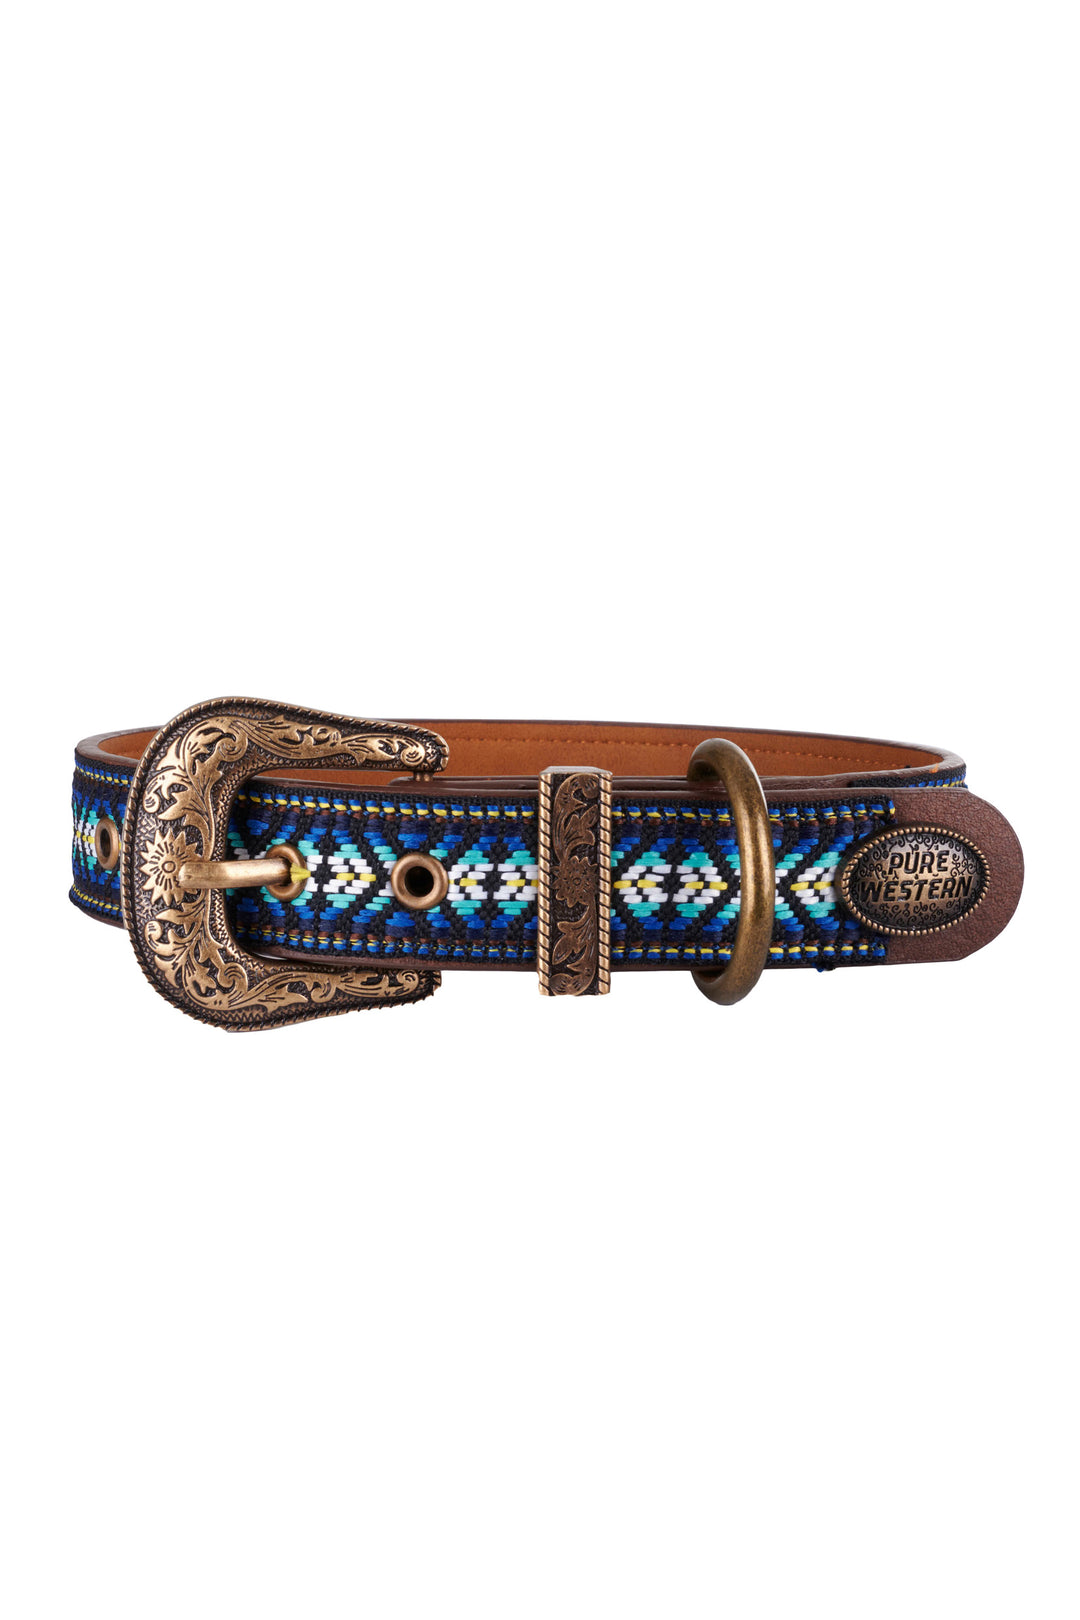 Pure Western - Chester Dog Collar Blue